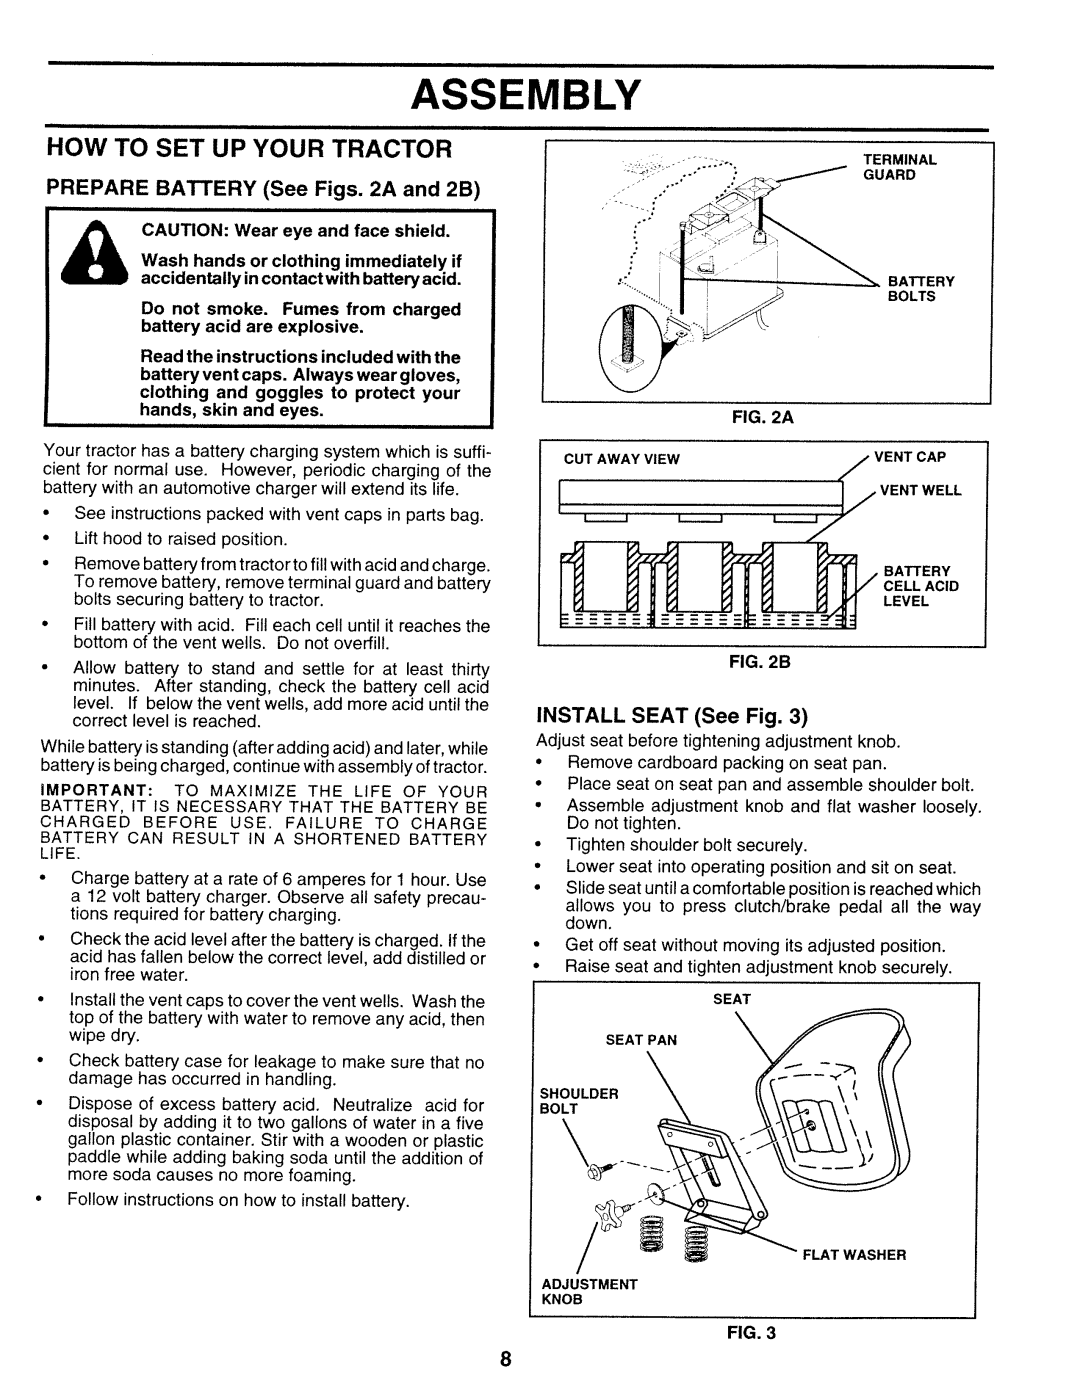 Sears 917.25271 Assembly, How To Set Up Your Tractor, PREPARE BATTERY See Figs. 2A and 2B, INSTALL SEAT See Fig, battery 